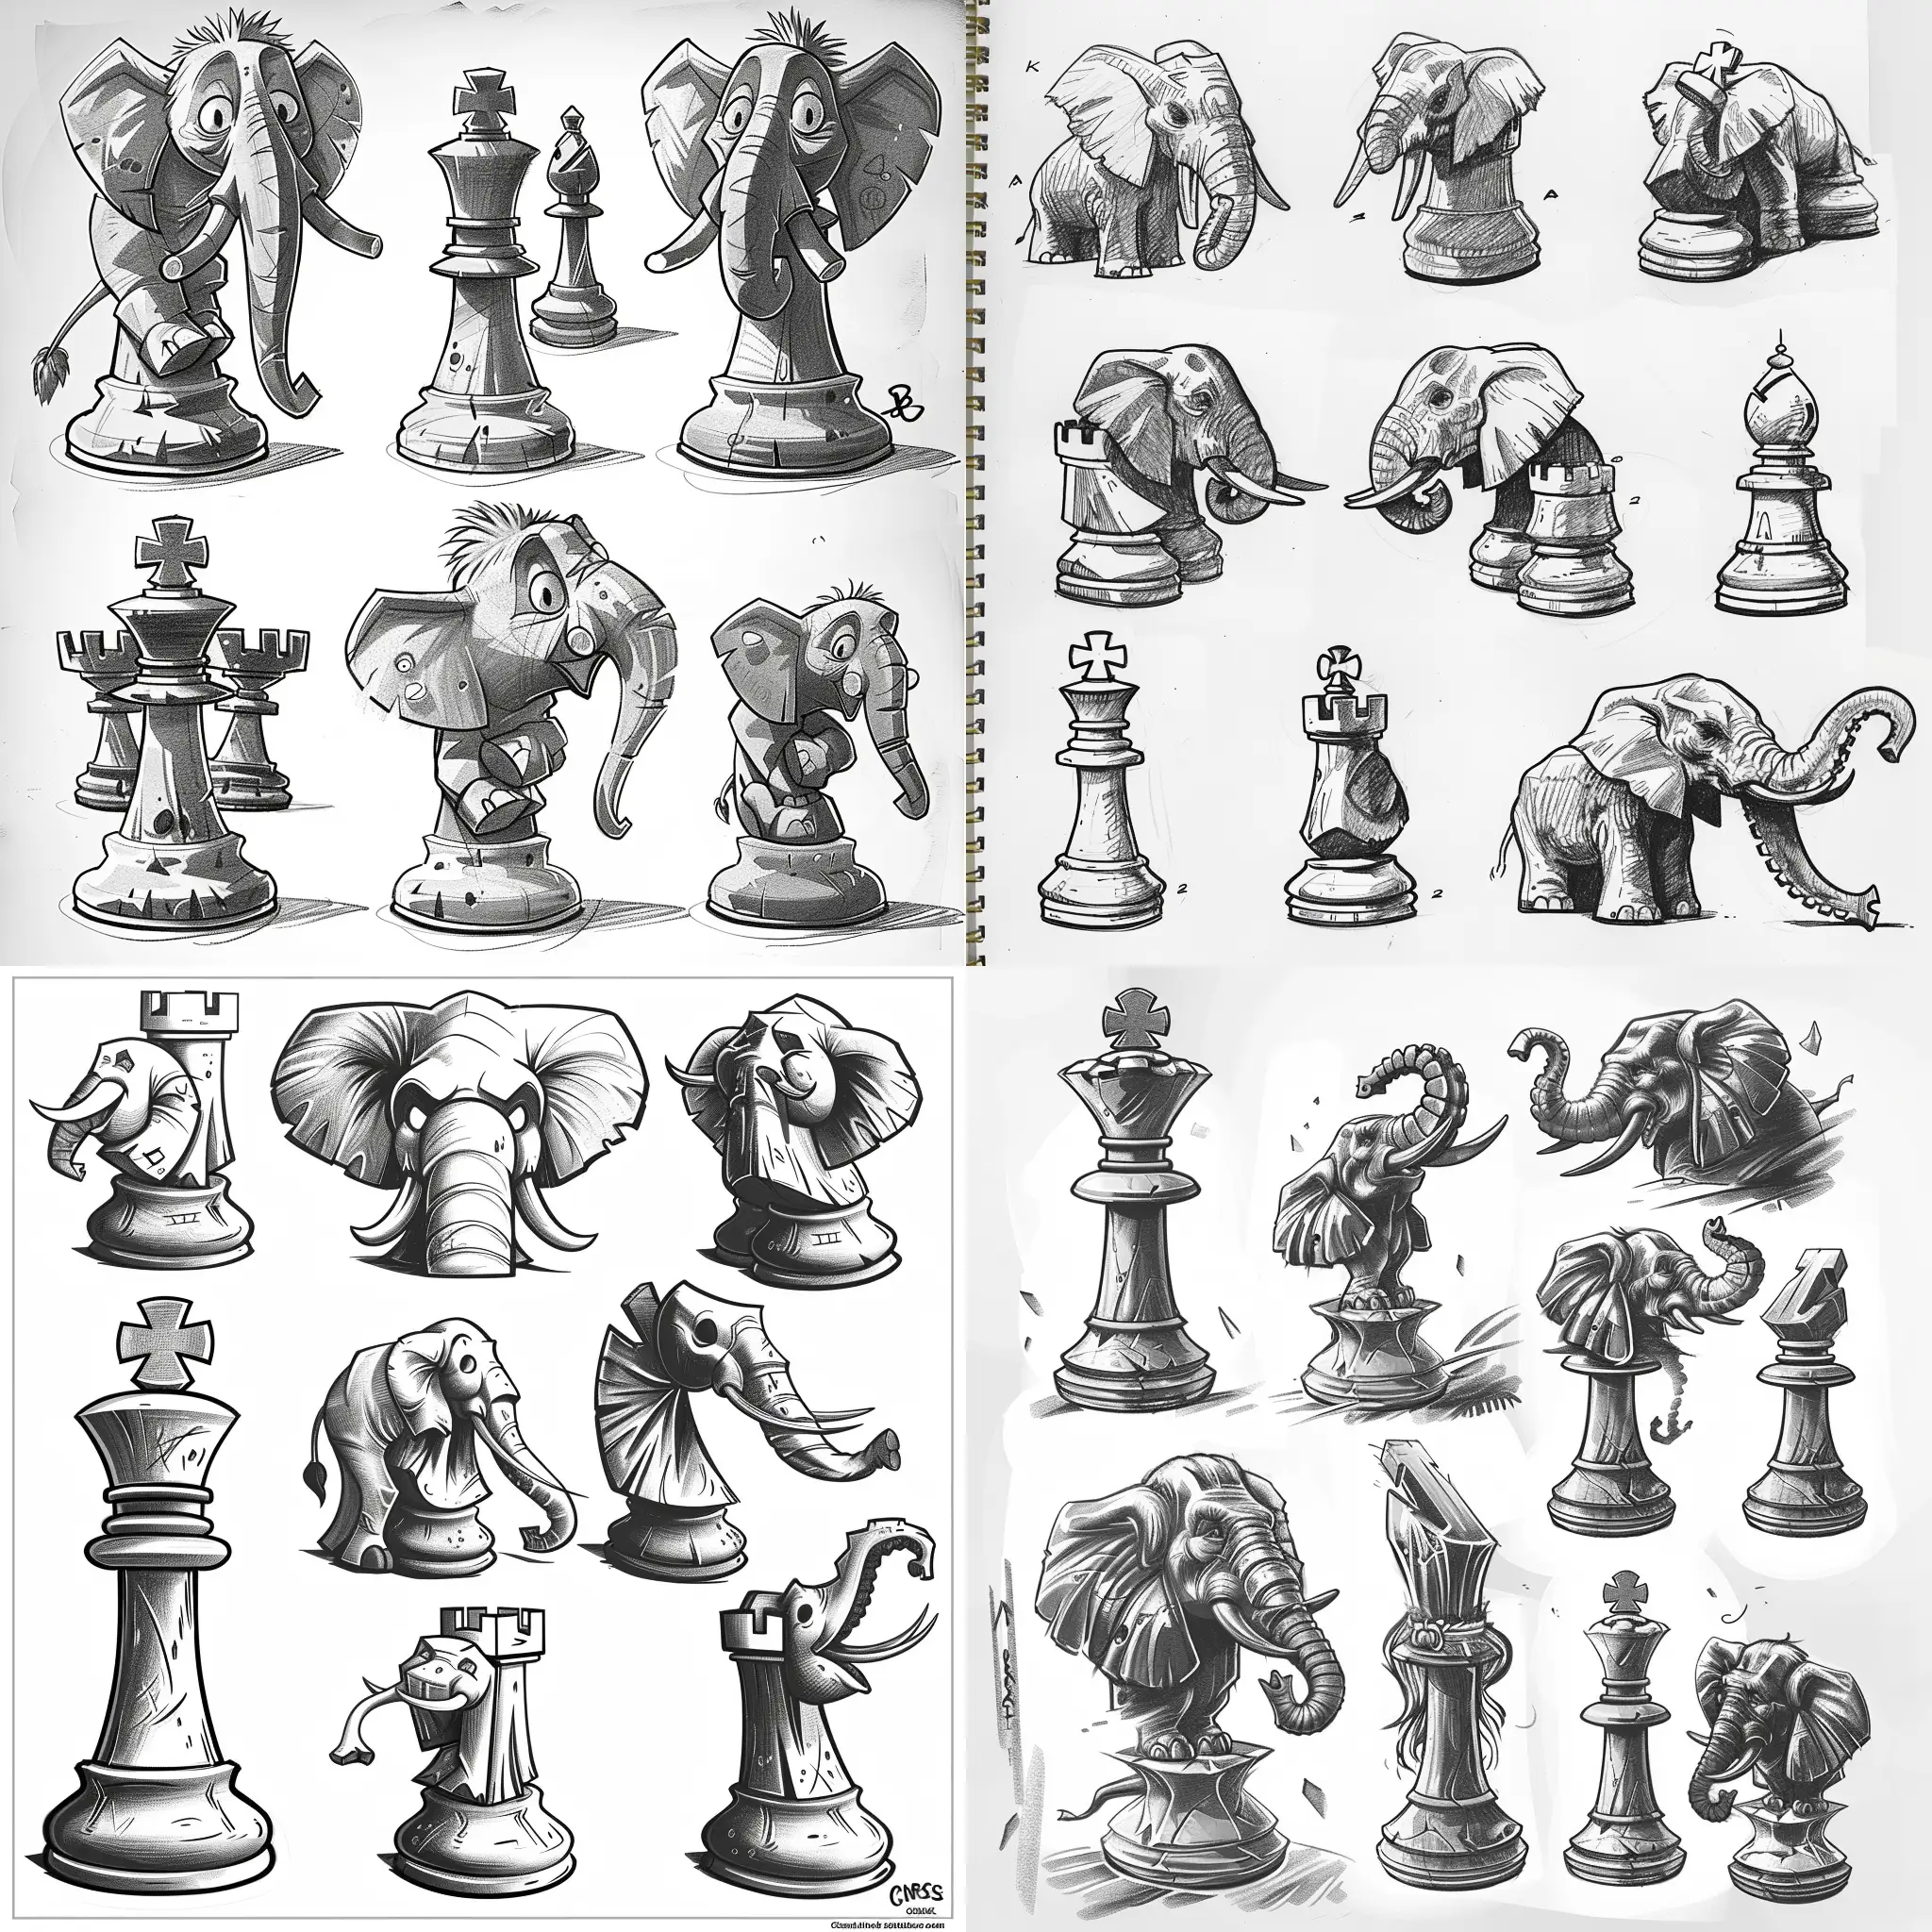 Stylized-Elephant-Chess-Pieces-in-Chris-Riddell-Style-Sketch